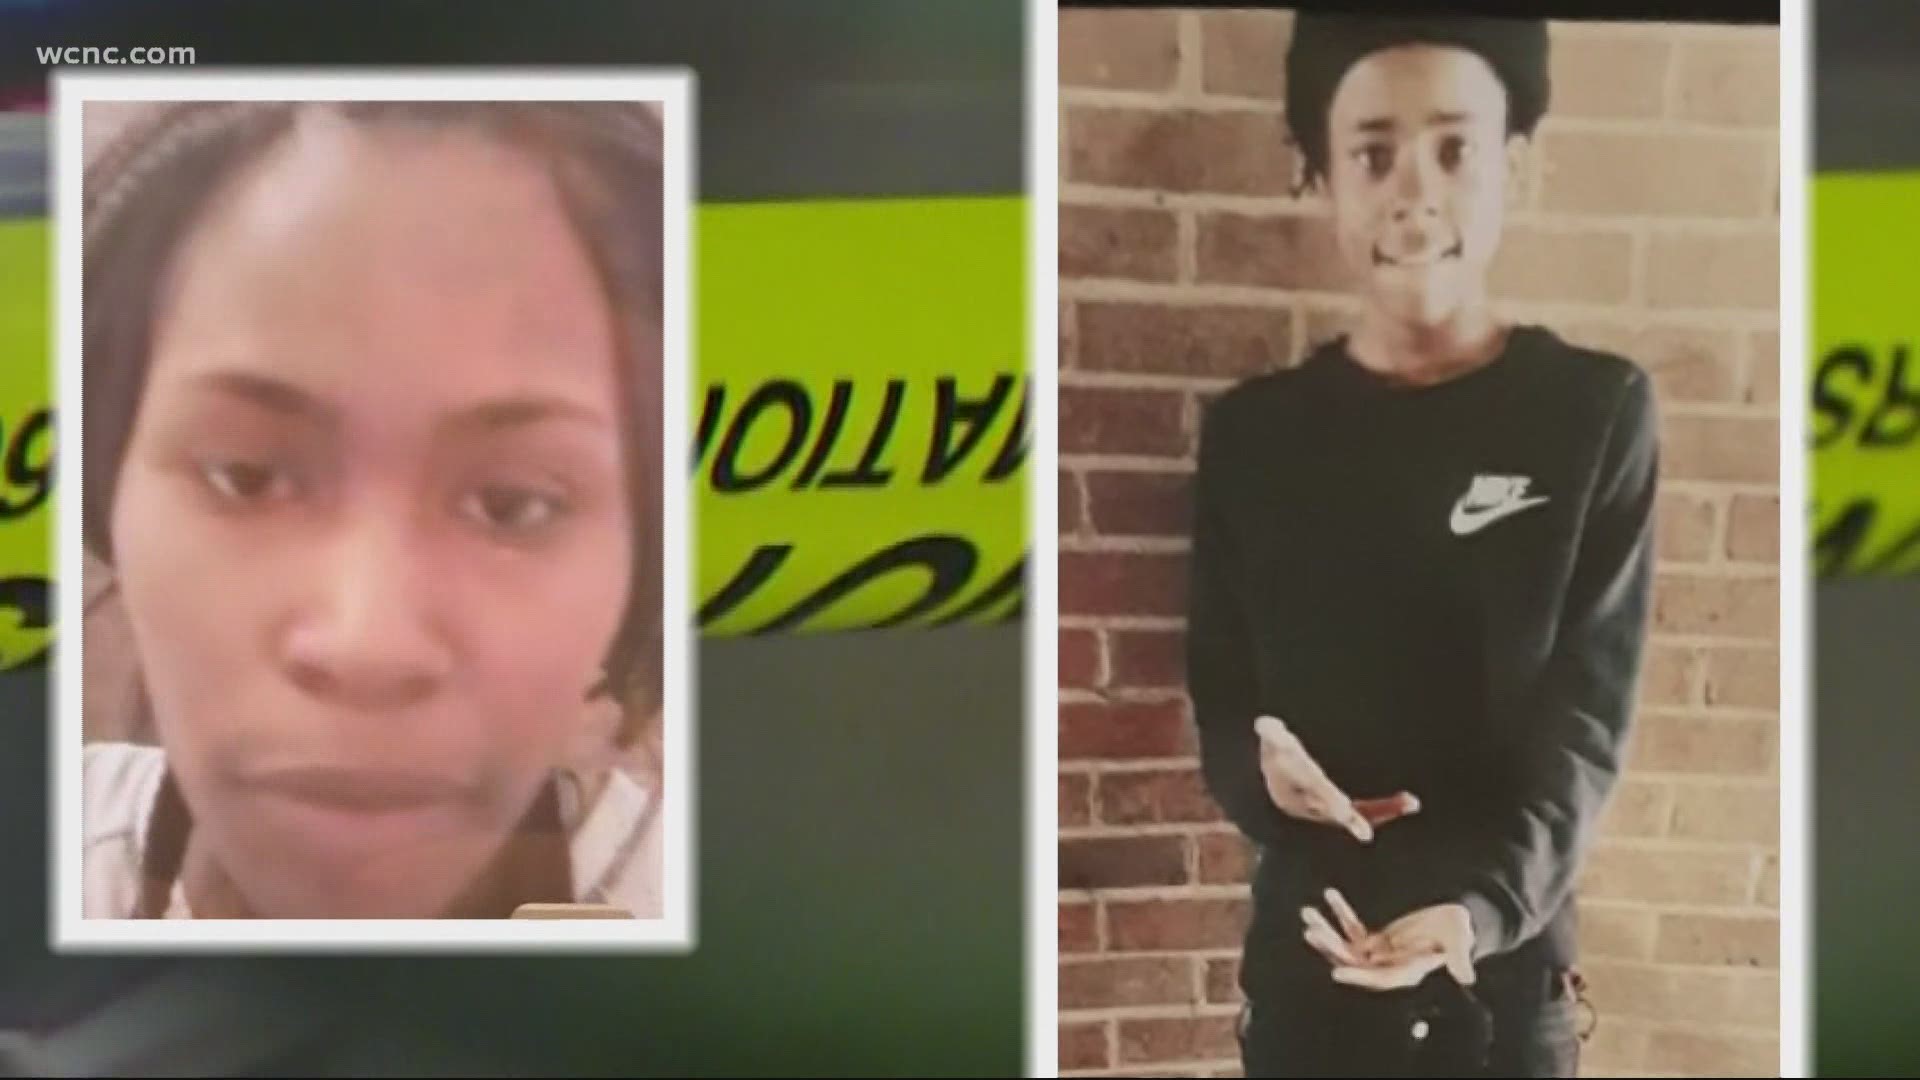 The number of teenagers that lost their lives to homicide in 2020 was double the amount who were killed in 2019, according to statistics released by CMPD.